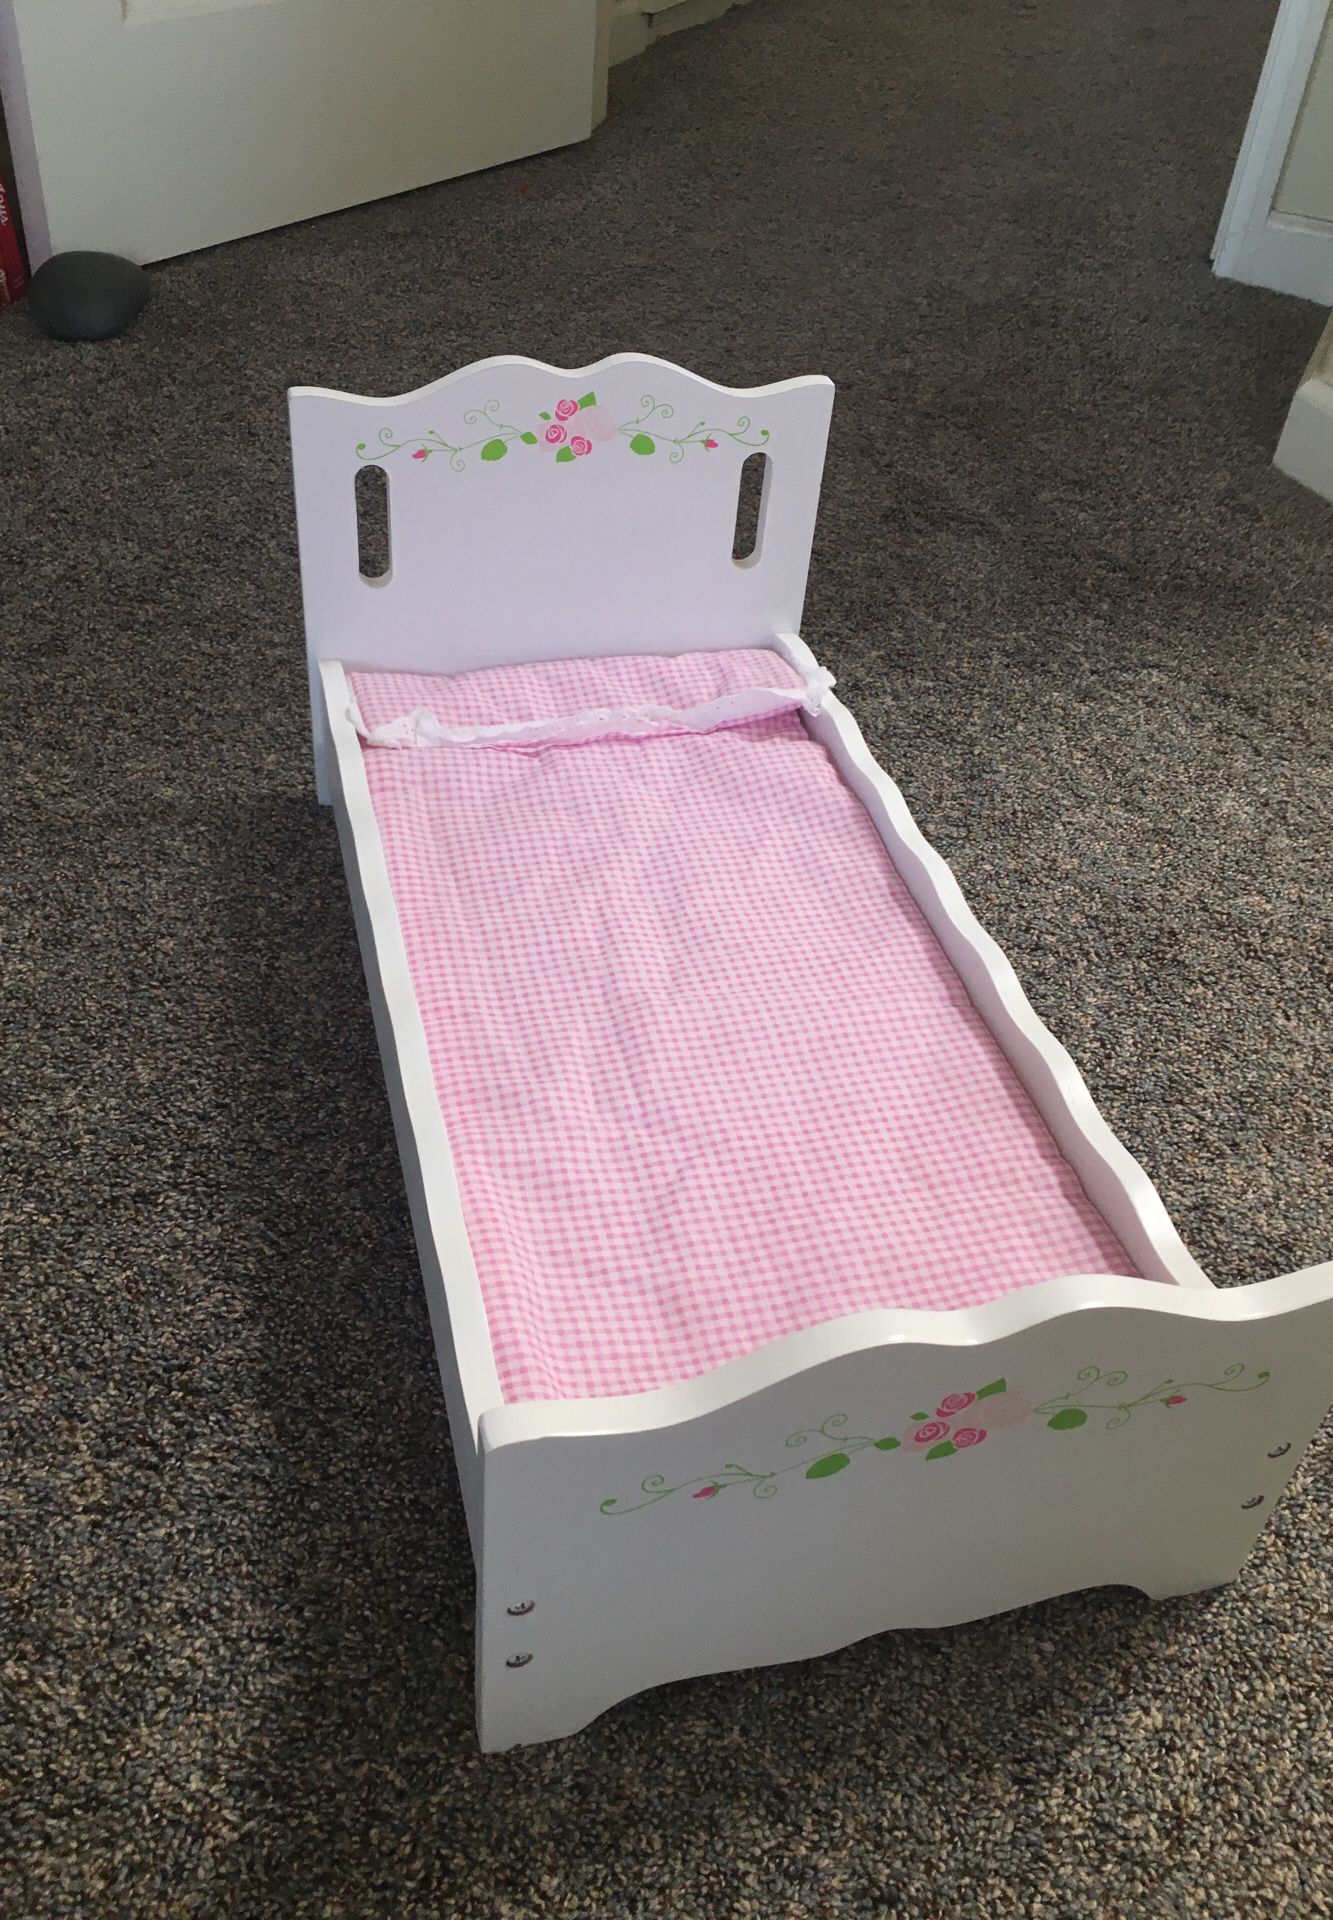 Doll bed